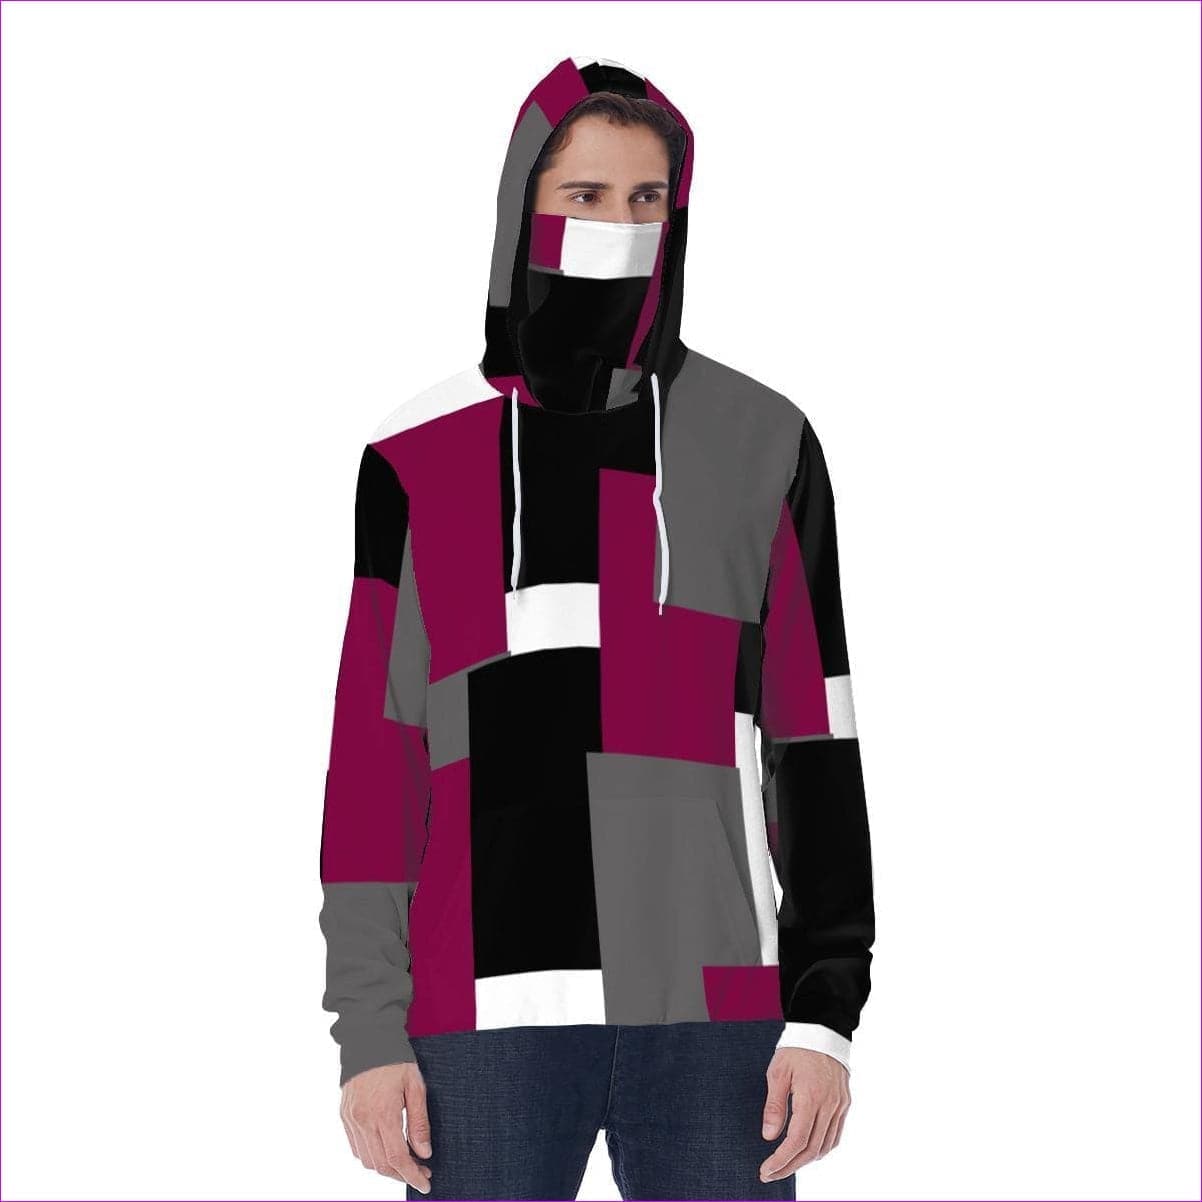 multi-colored - Patchwork Unisex Pullover Hoodie w/ built in mask - Unisex Hoodie at TFC&H Co.